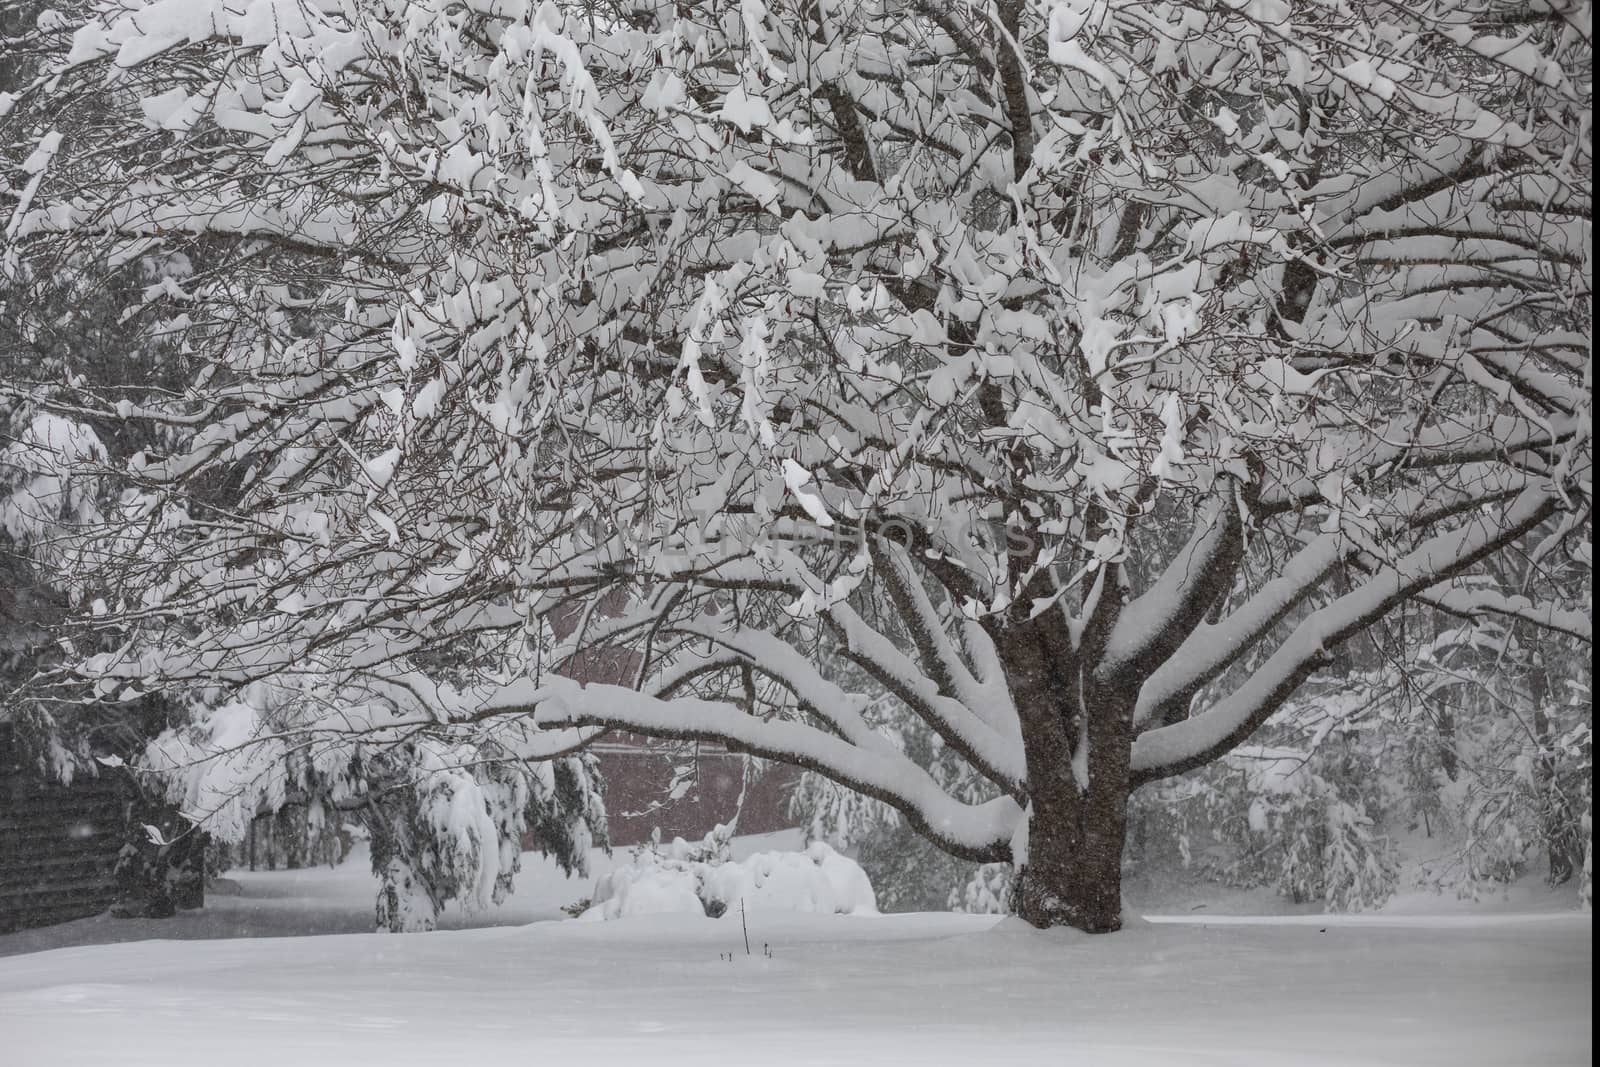 Deep First Snow on Cherry Tree by CharlieFloyd